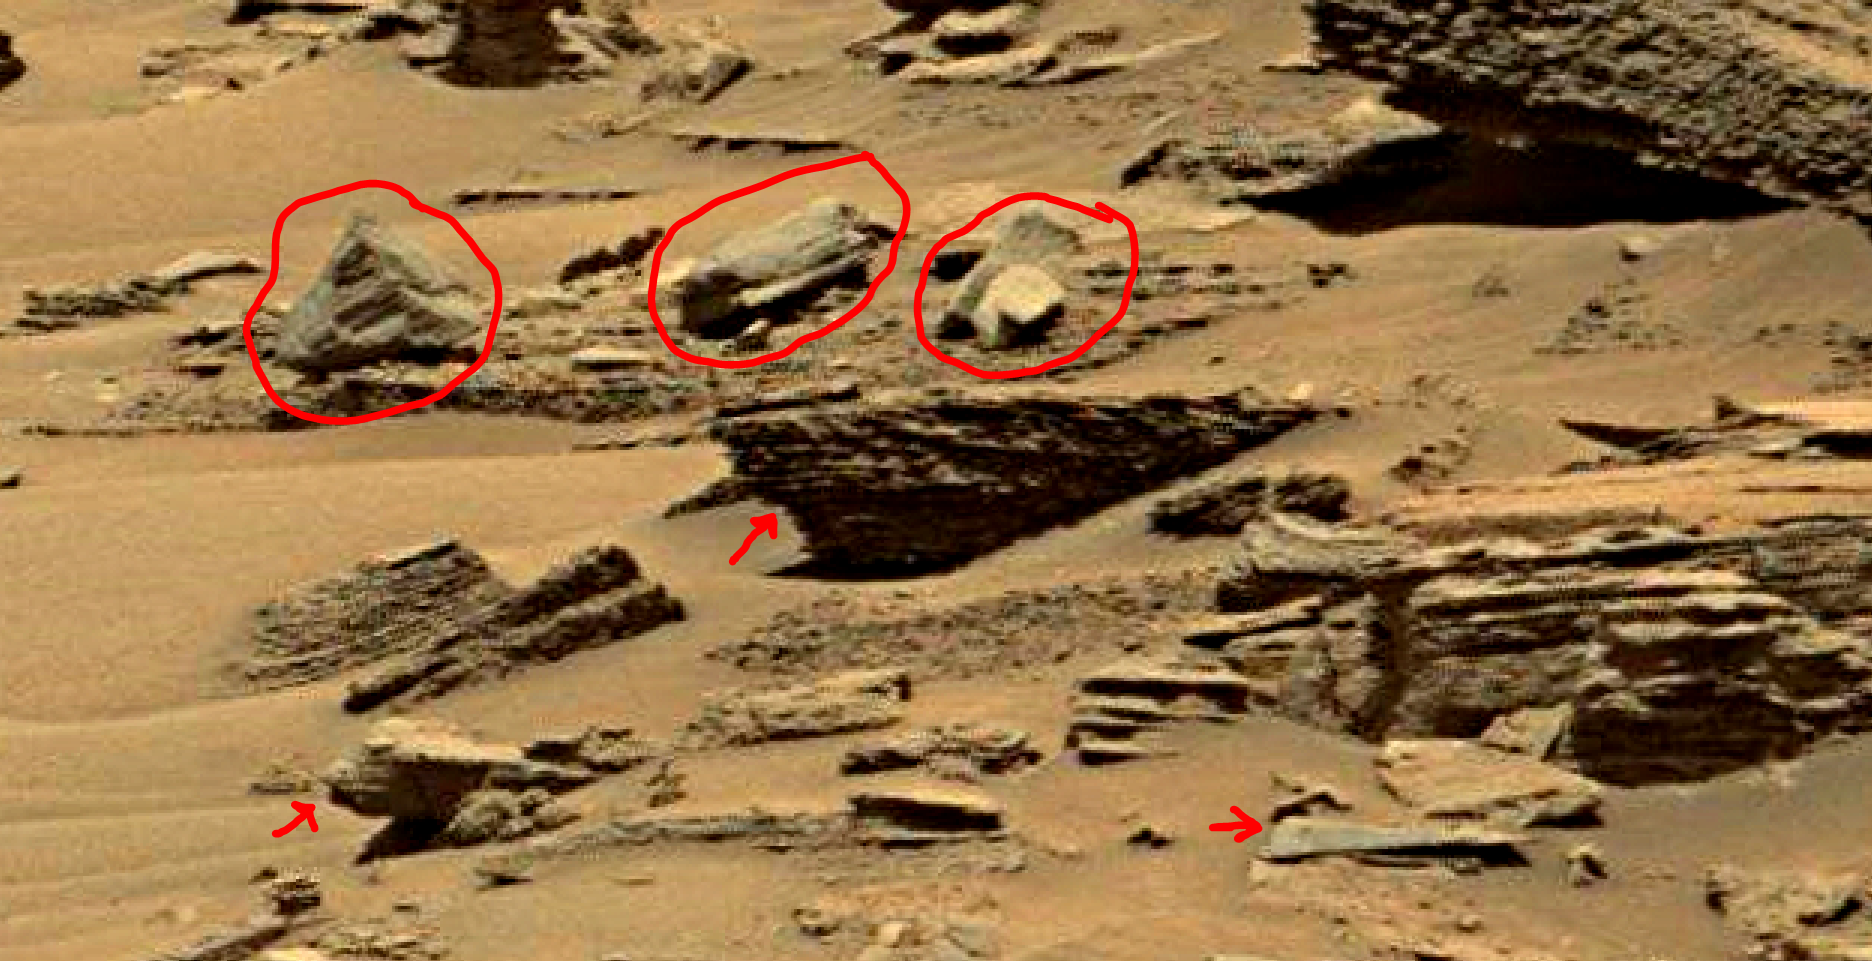 mars sol 1353 anomaly-artifacts 6d was life on mars